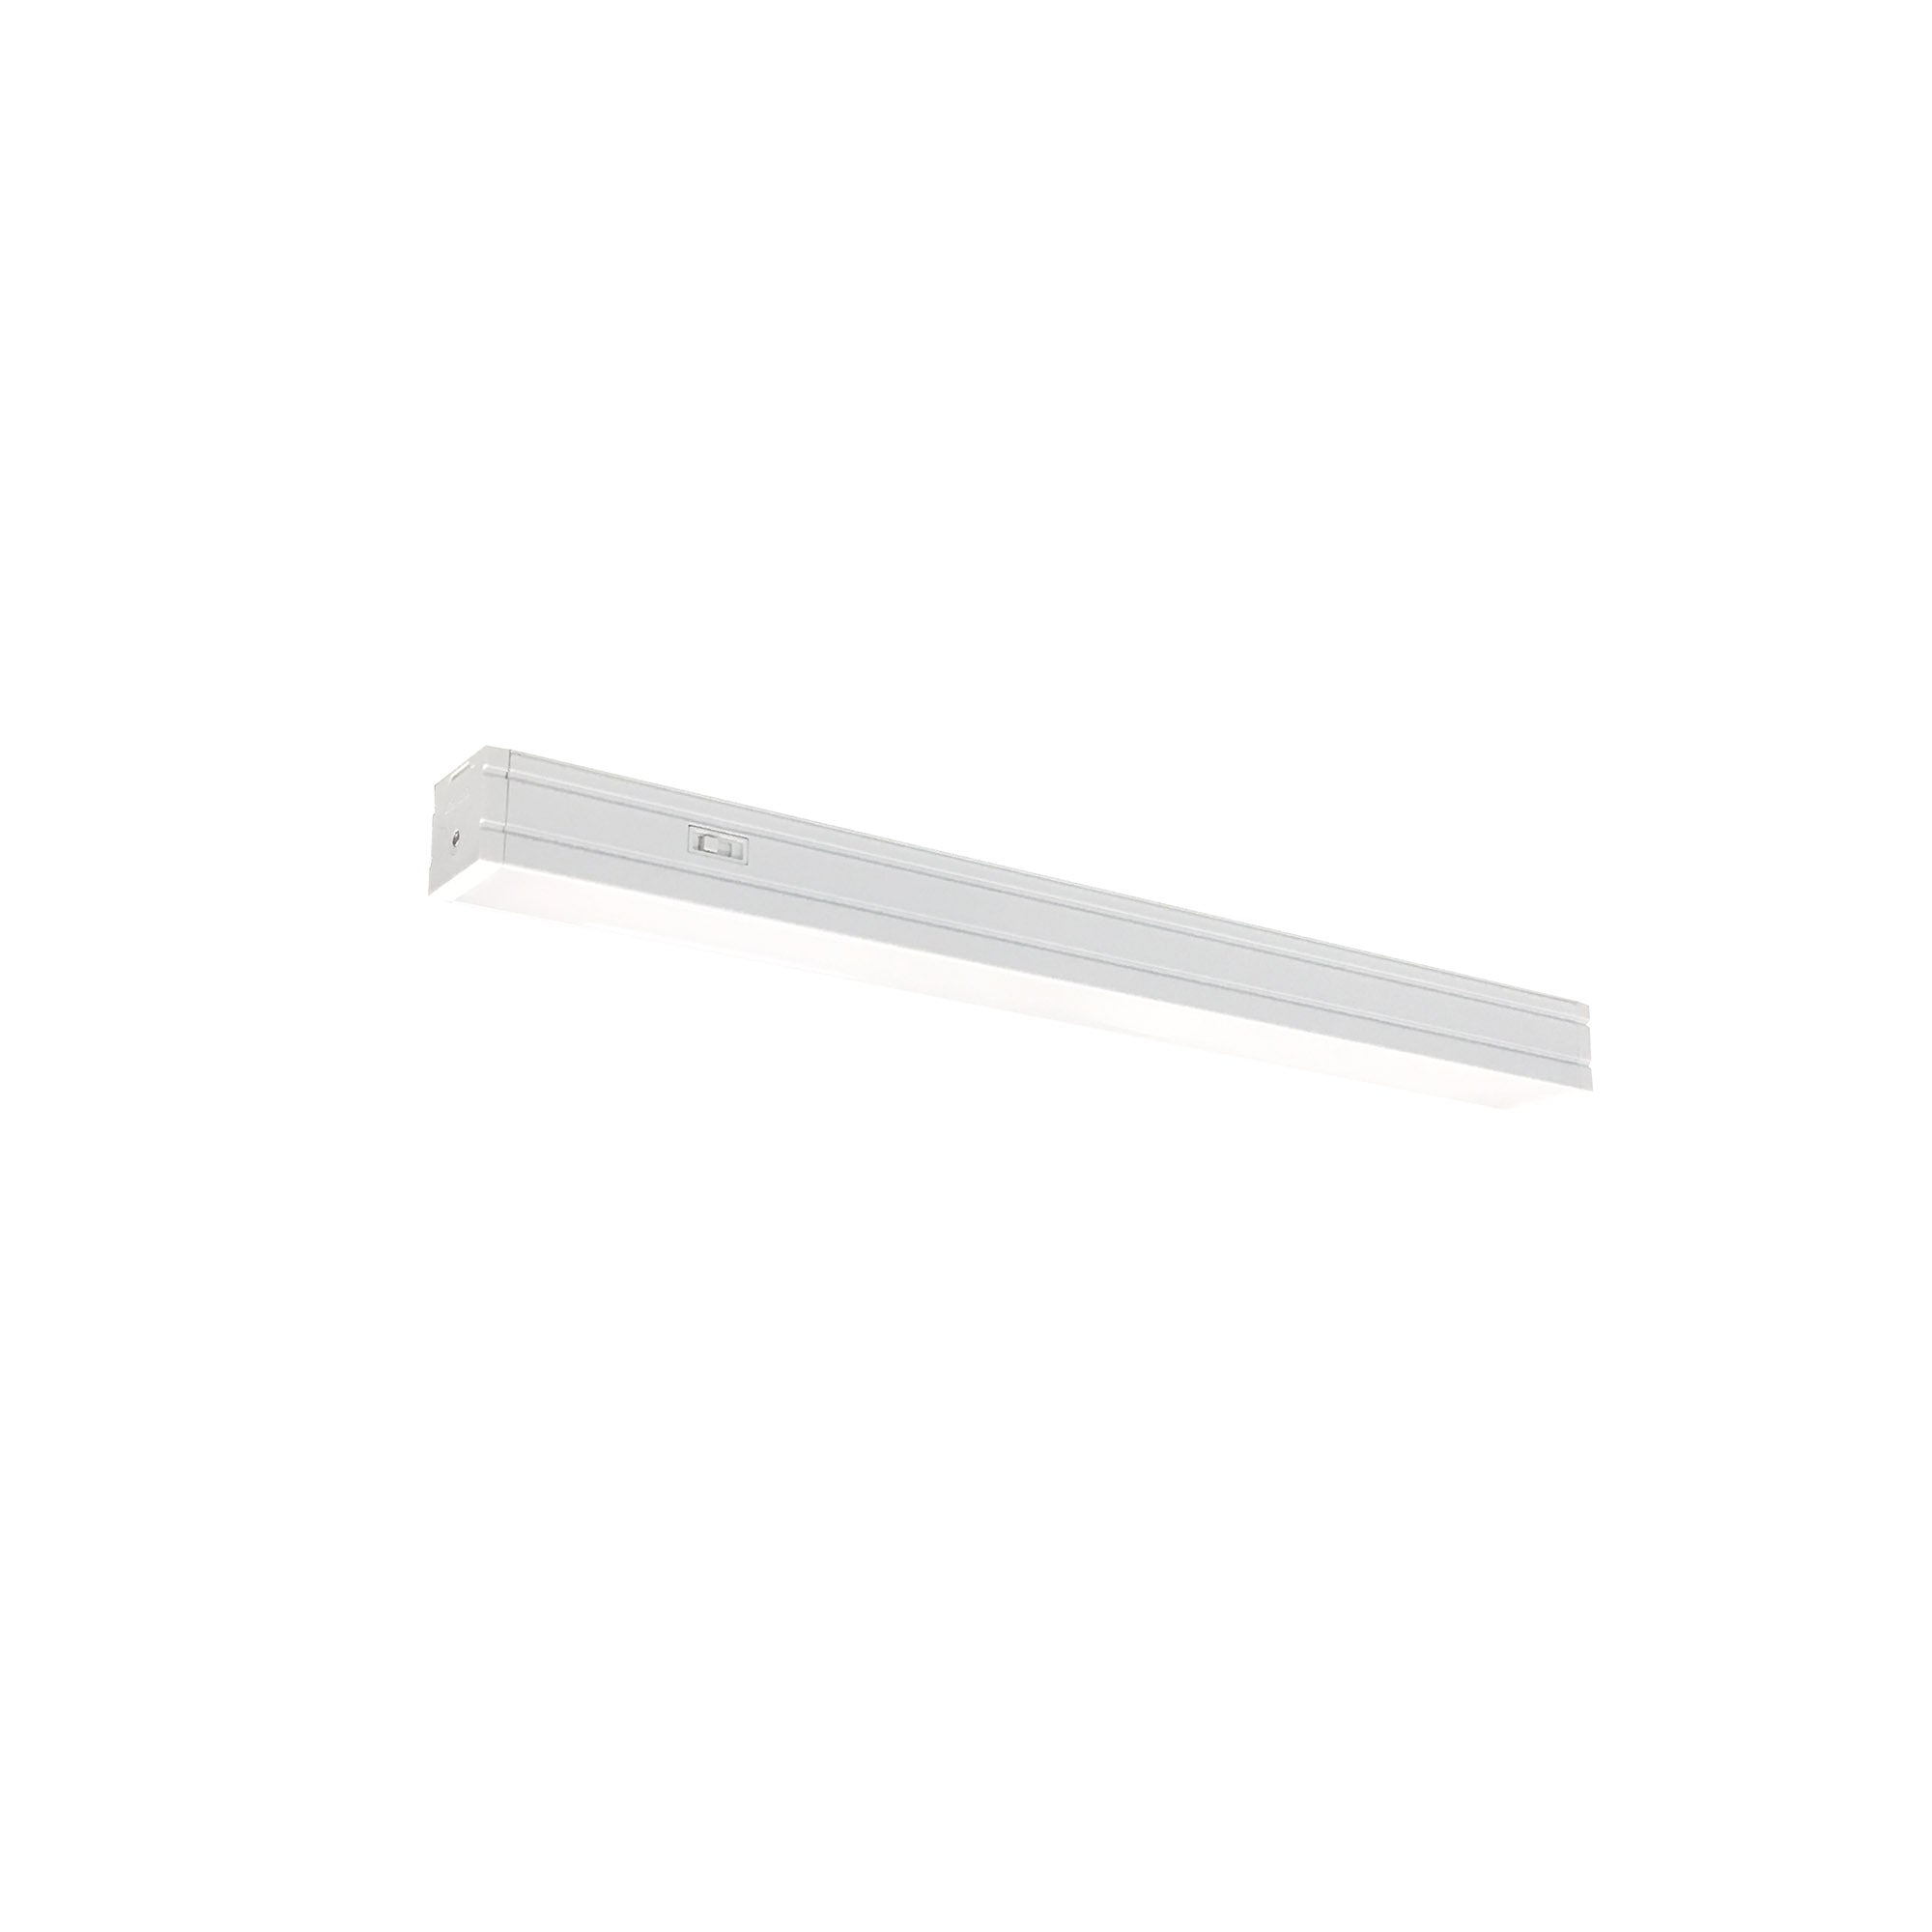 Nora Lighting NUDTW-9832/W - Accent / Undercabinet - 32 Inch Bravo FROST Tunable White LED Linear, 3000/3500/4000K, White